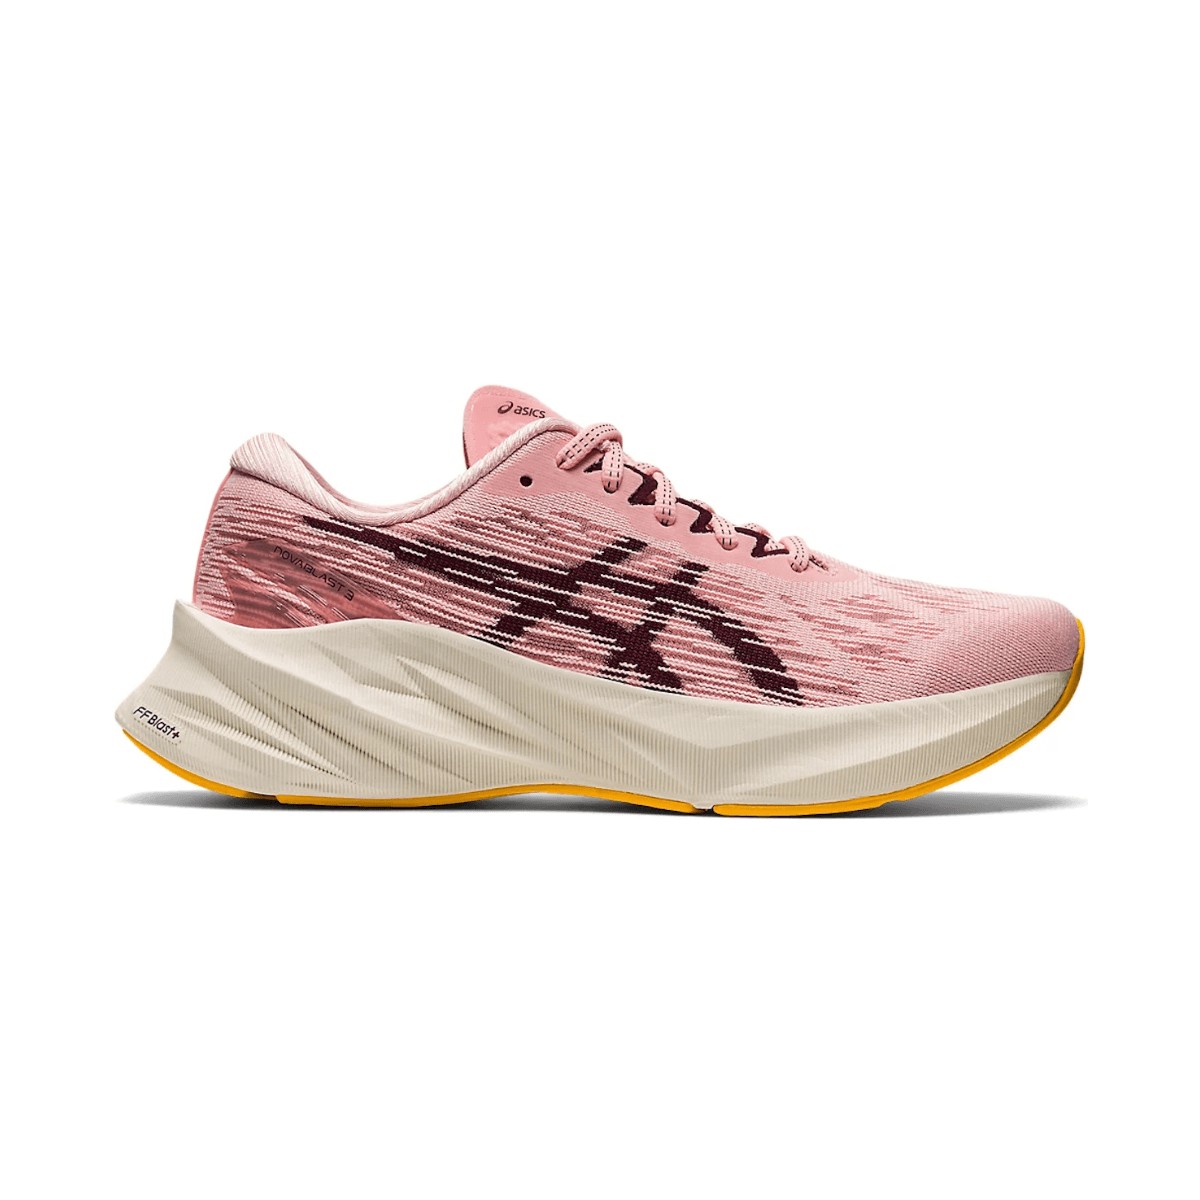 Gaseoso sufrimiento sangre Asics Novablast 3 Pink White Women's Running Shoes |At the Best Price